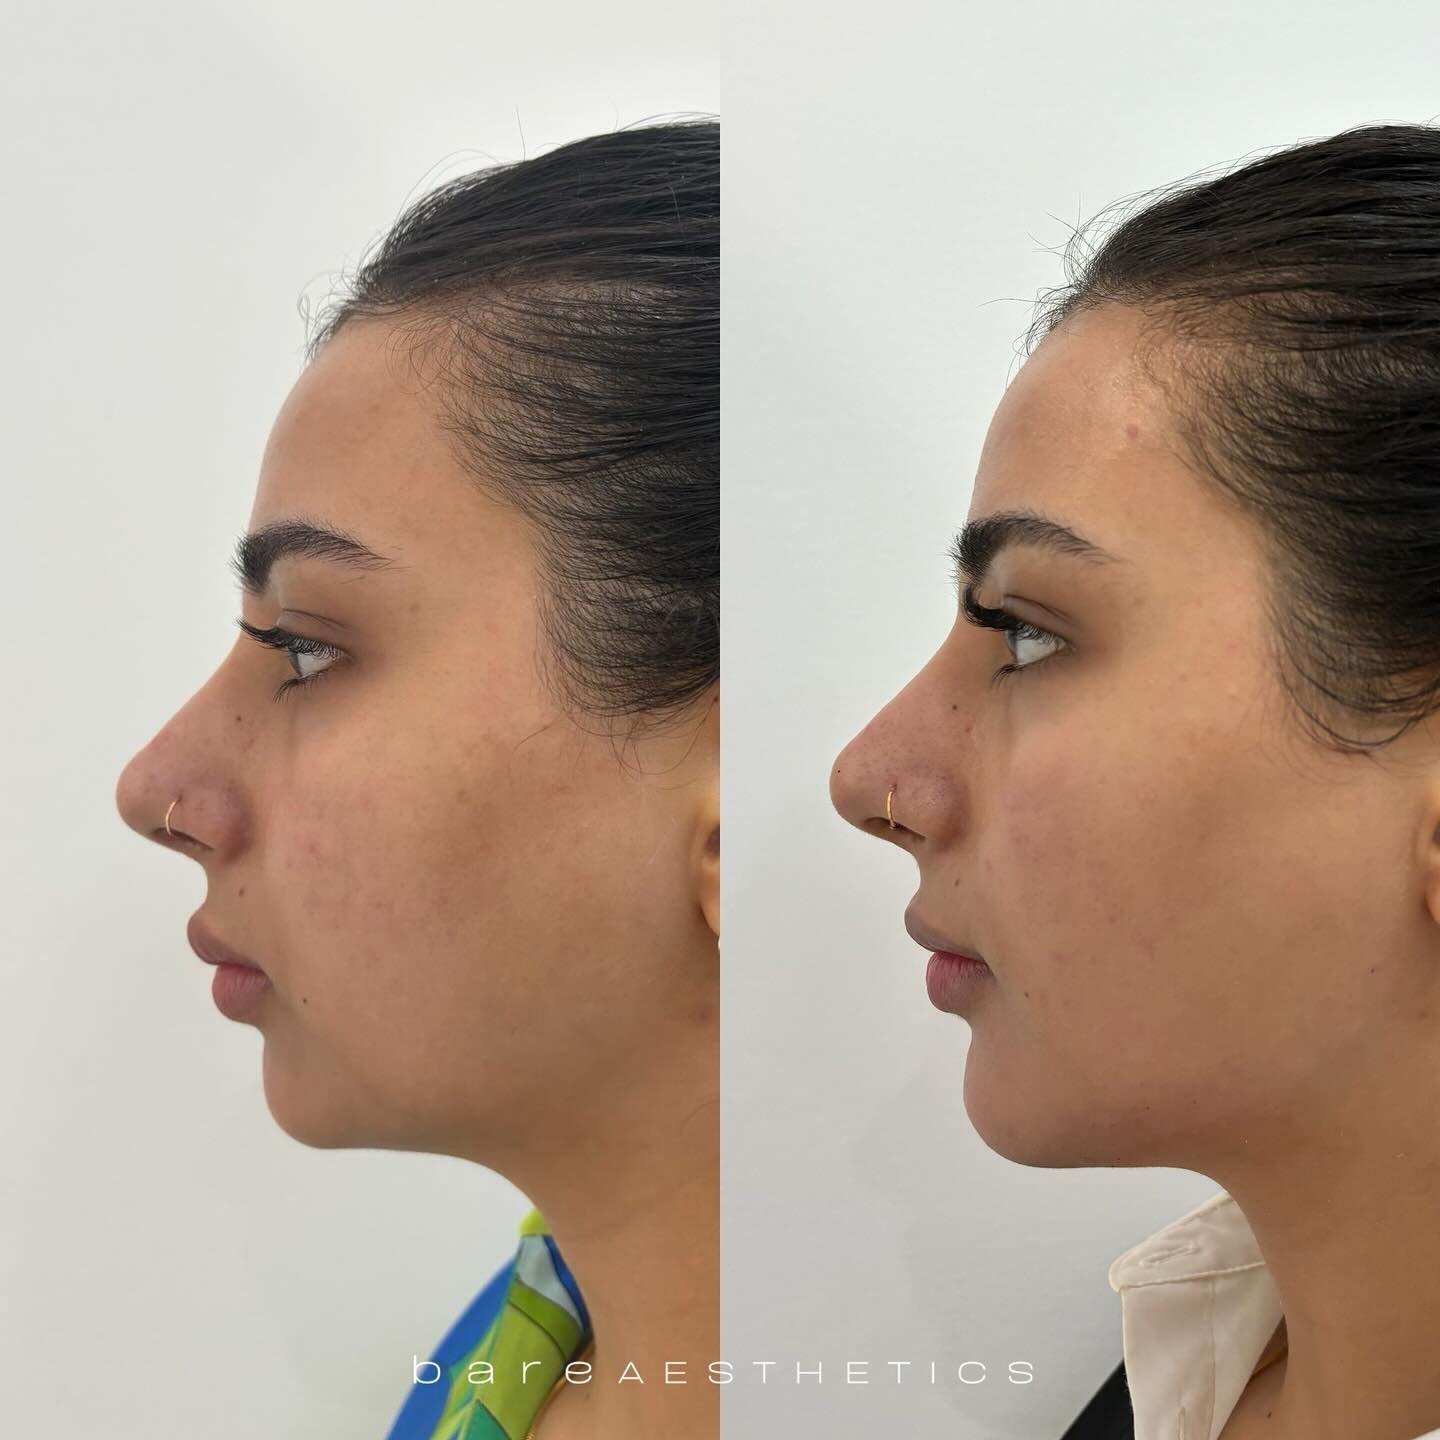 Facial balancing consultation available with AHPRA Registered Nurse Suki. 

Our client&rsquo;s main concerns: 
&bull; Imbalance in her side profile 
&bull; Wanting more jawline definition 
&bull; Migrated lip enhancement (not our work)

Achieved over